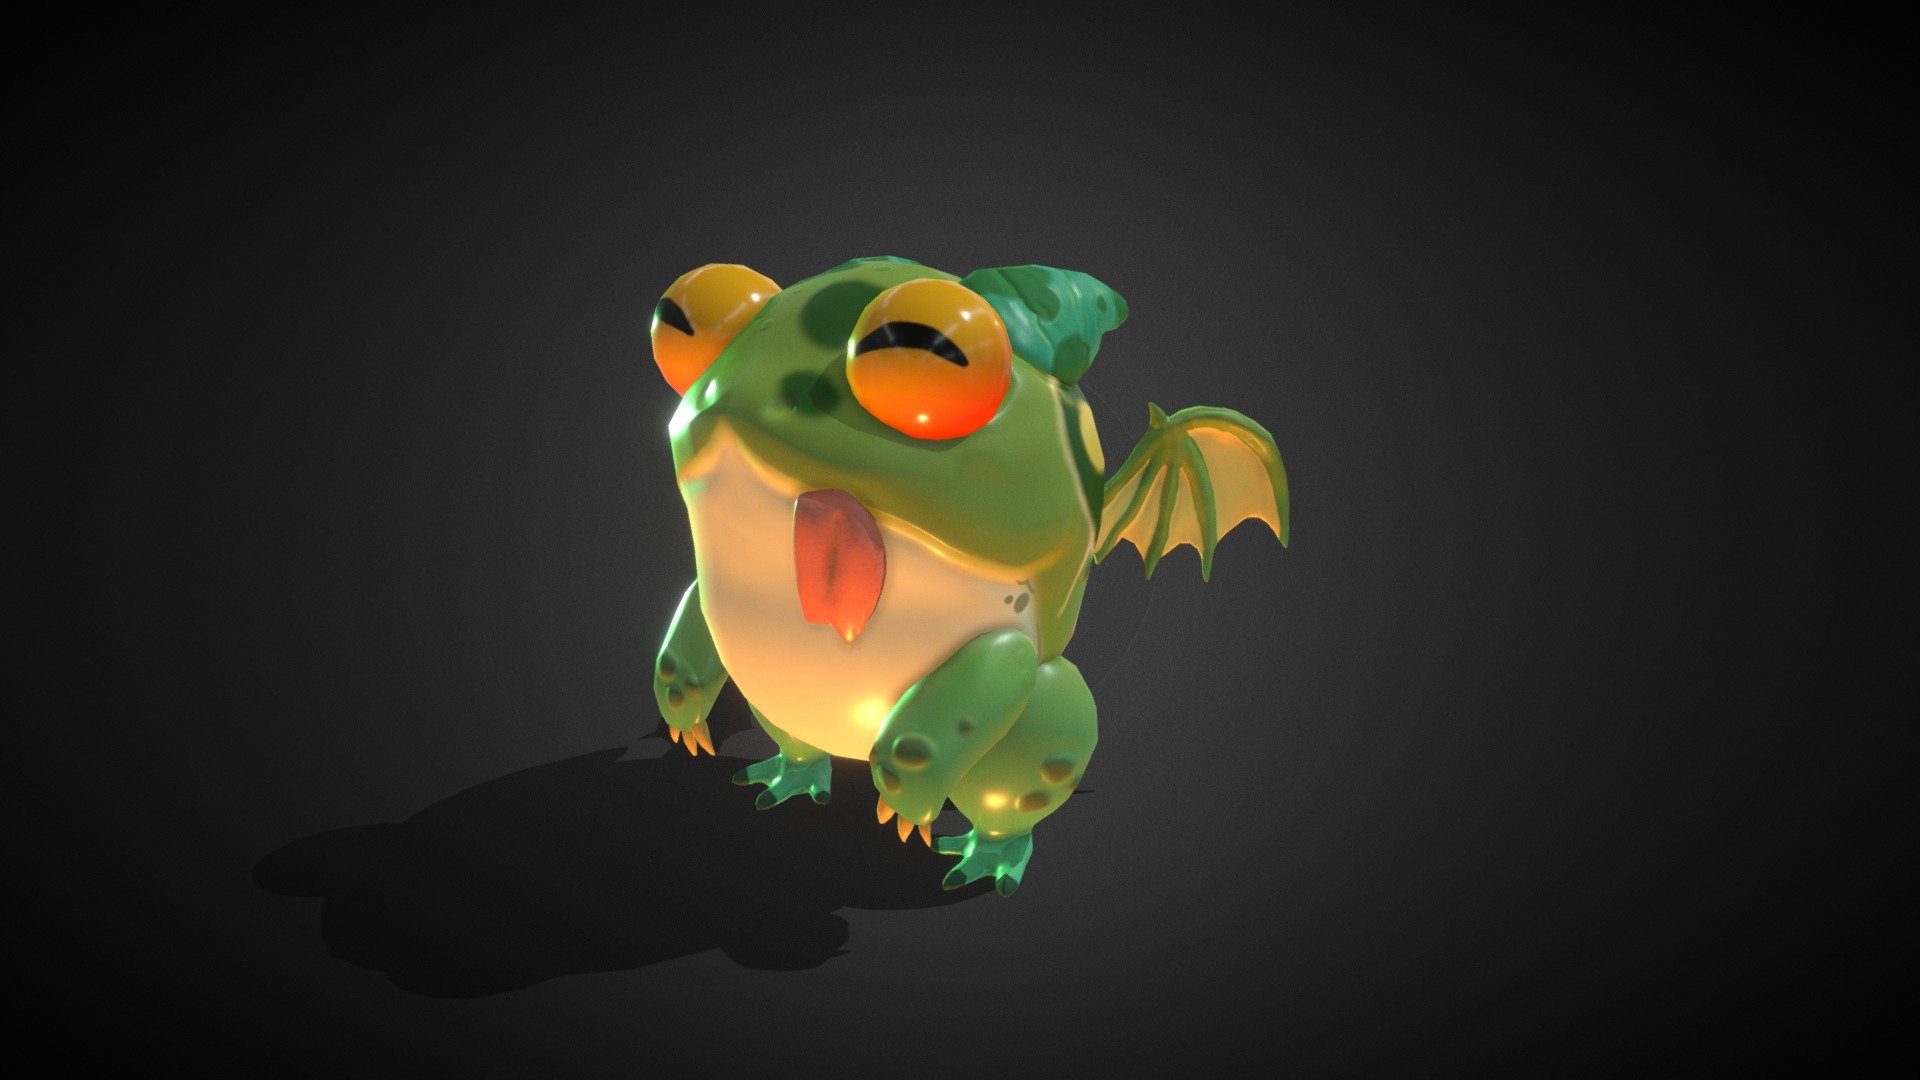 I made a TFT Draginlands Poggle model from the concept made by Cherry CHE using ZBrush and SUbstance Painter! This is my first personal 3D project that I worked on and pretty happy with the results.

This character is owned by Riot Games and this is just a personal project for my portfolio 3d model